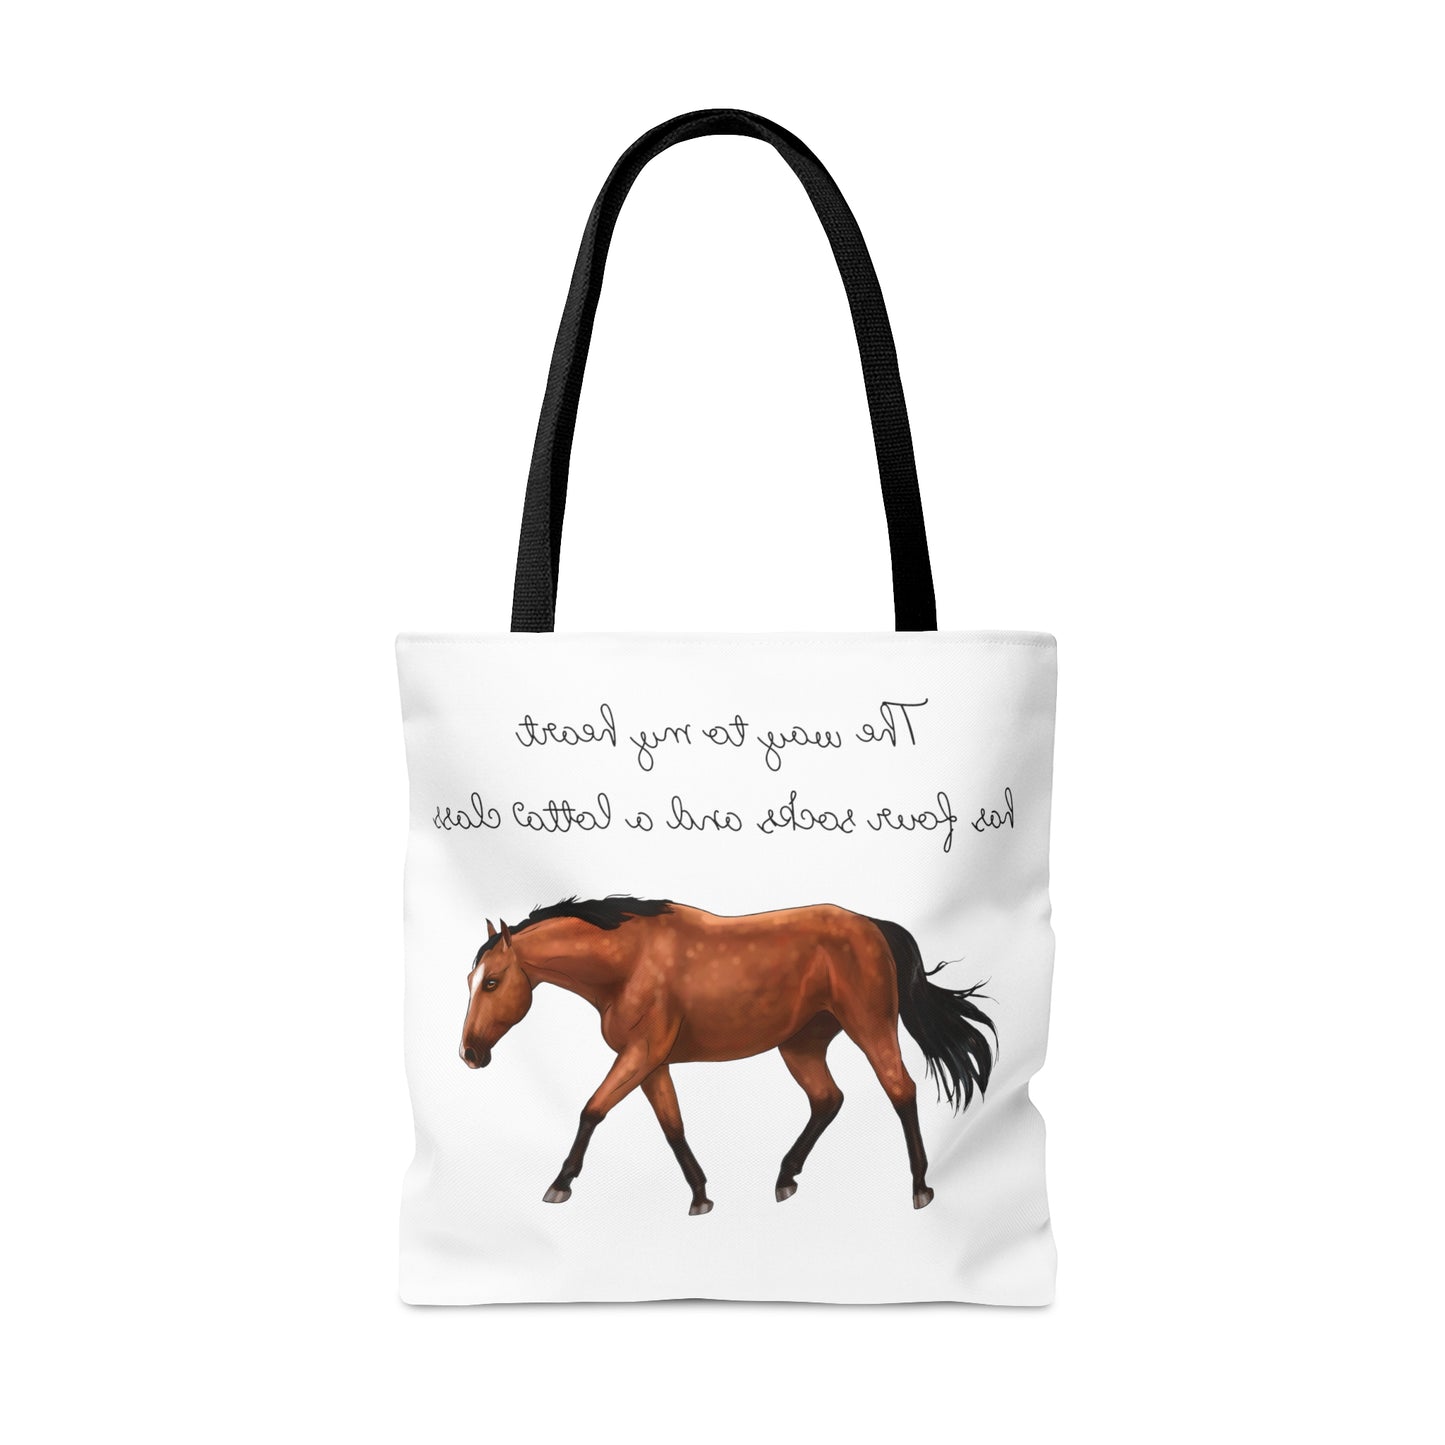 The Way to my Heart - Bay - Tote Bag